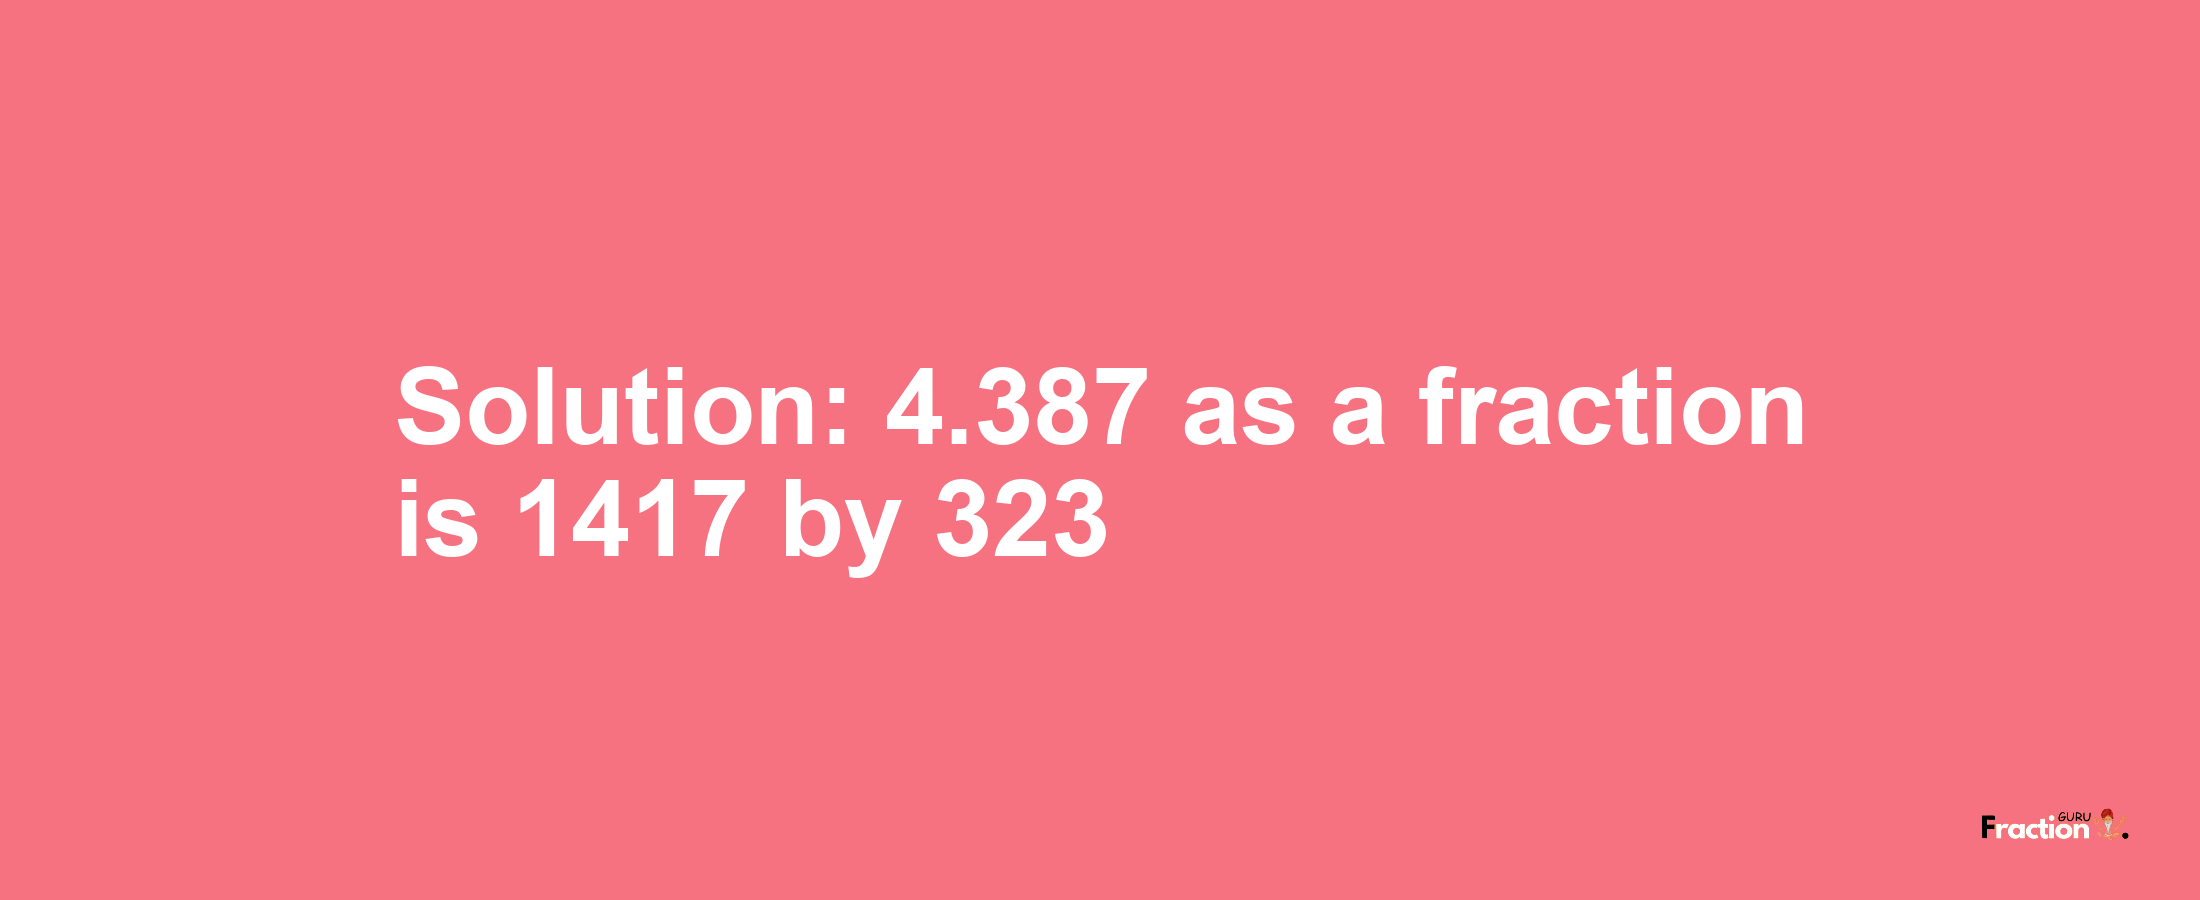 Solution:4.387 as a fraction is 1417/323